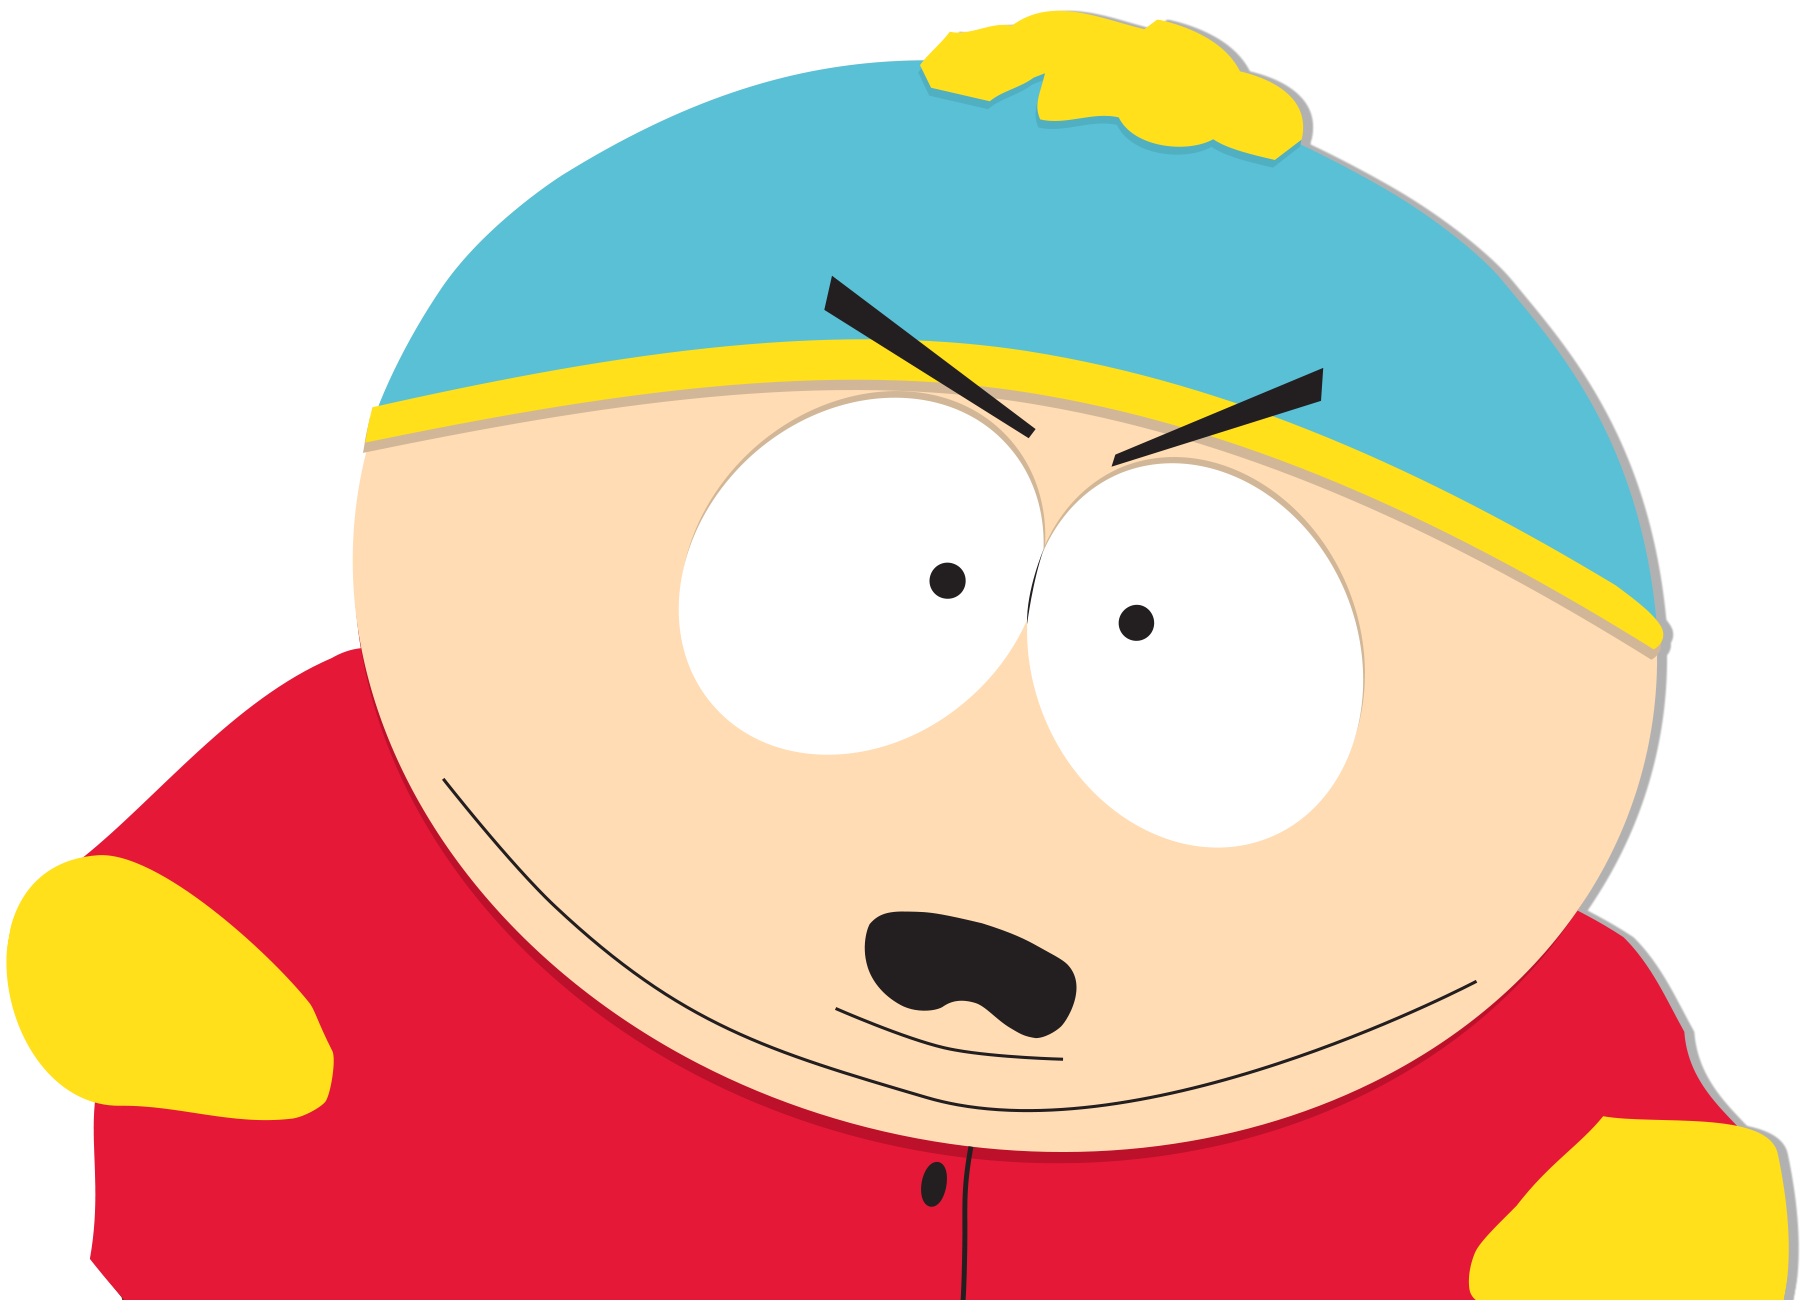 aakash shinde recommends Pics Of Cartman From South Park